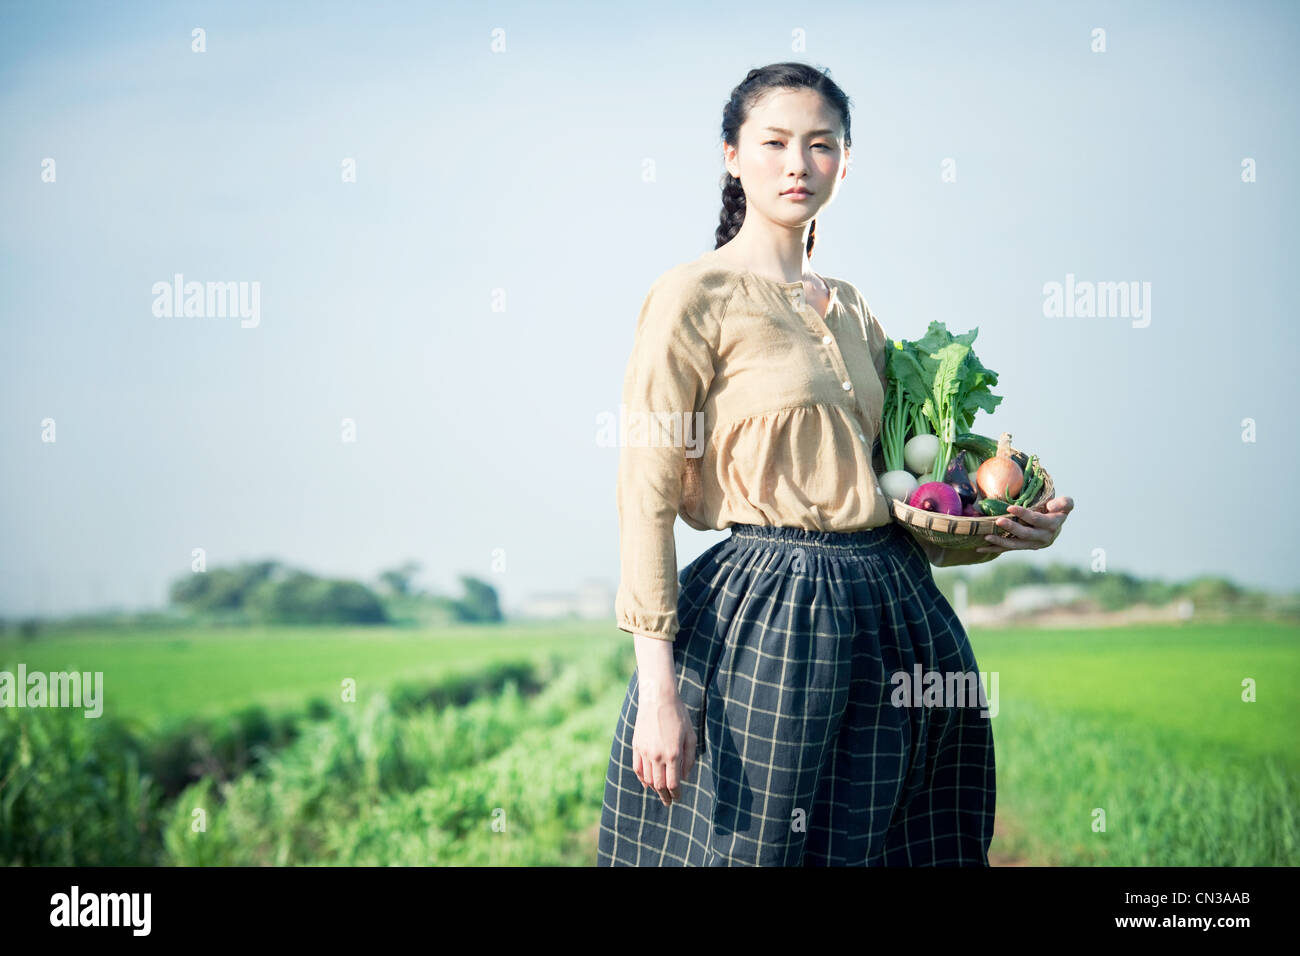 Young woman in field holding basket of homegrown vegetables Stock Photo